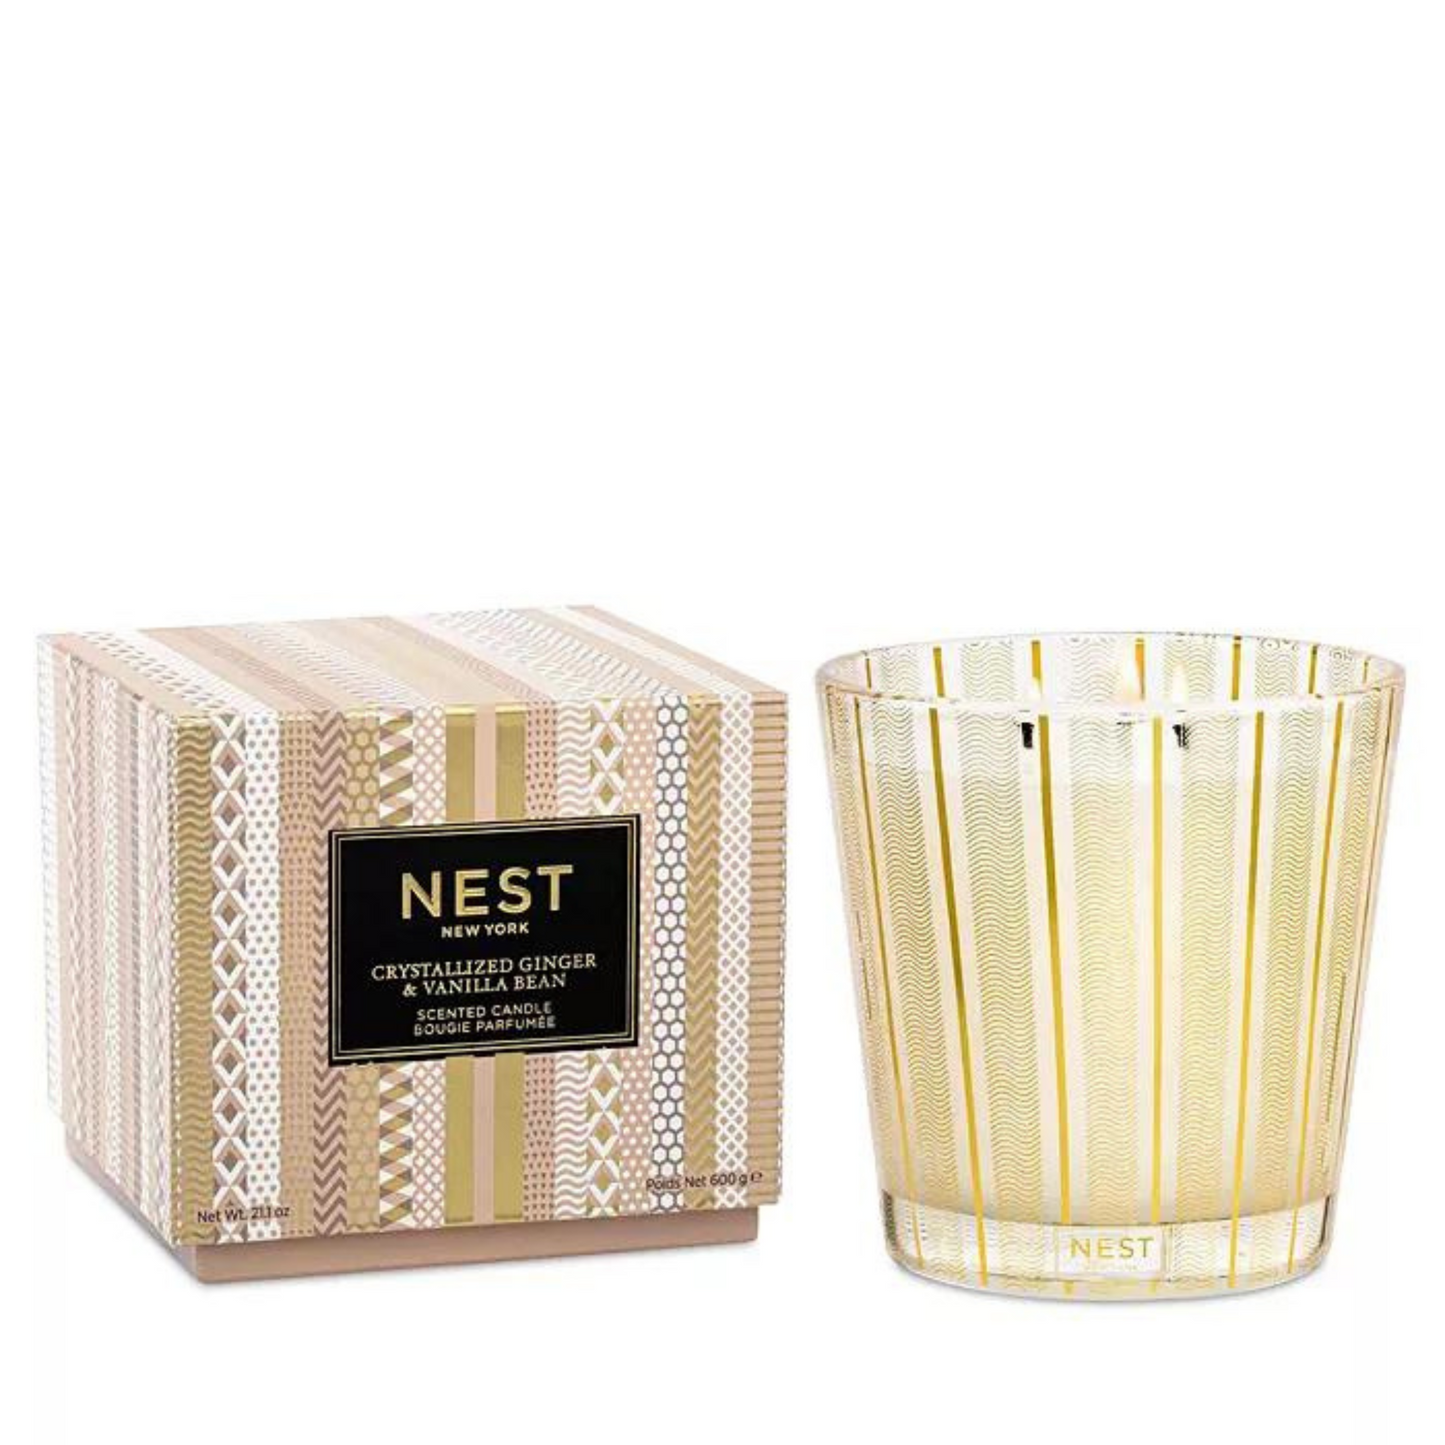 Primary Image of Nest Fragrances Crystallized Ginger & Vanilla Bean 3-Wick Candle (21.1 oz)